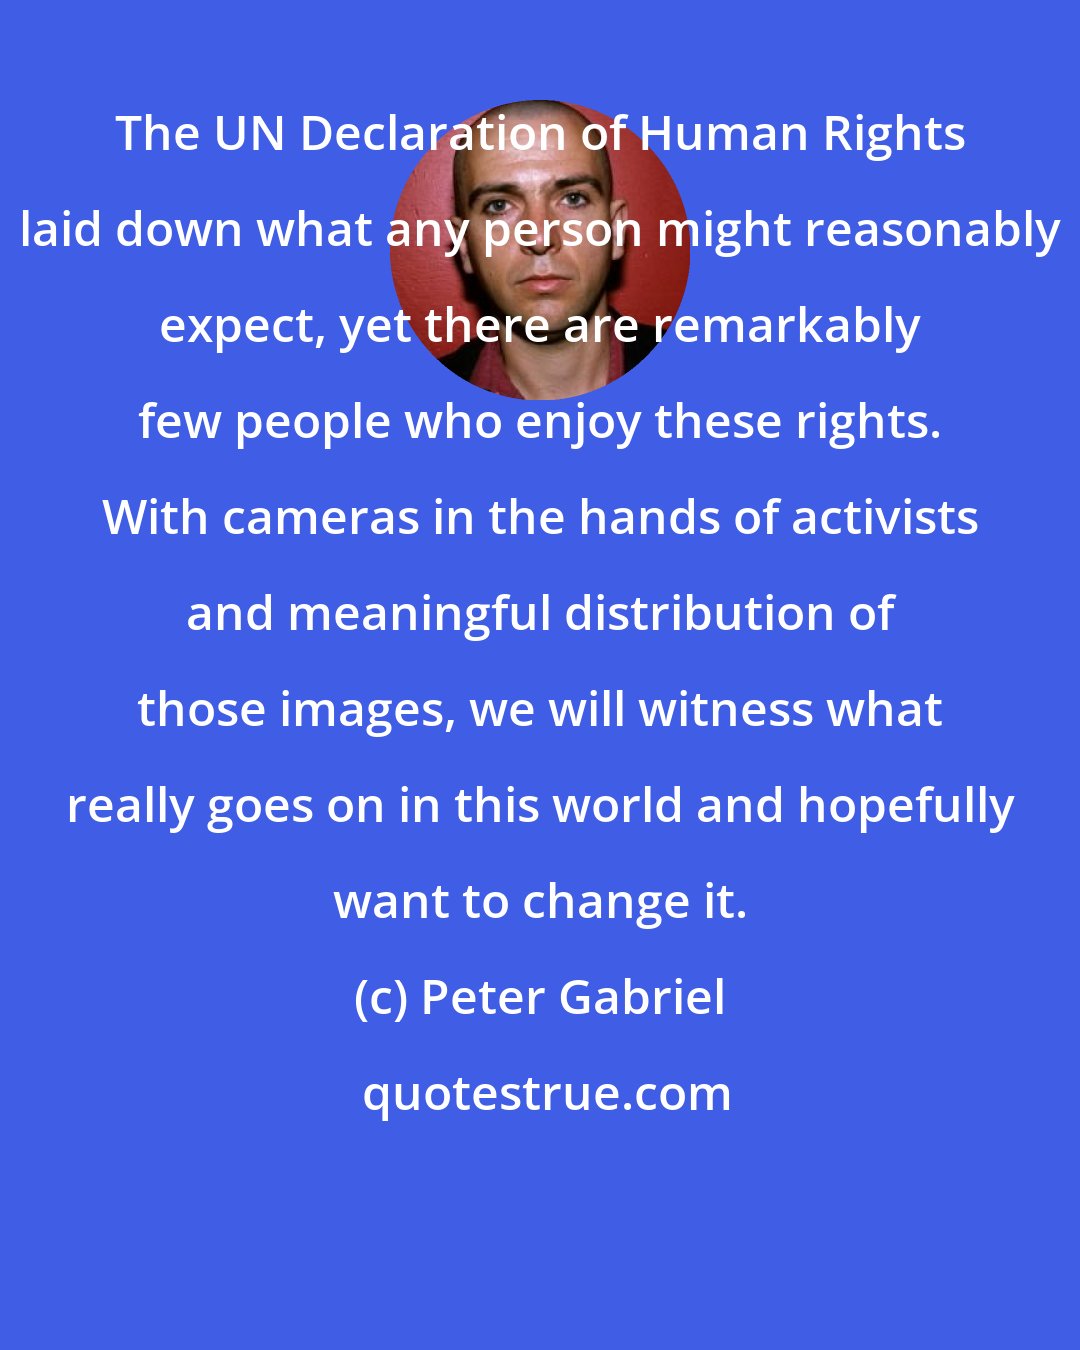 Peter Gabriel: The UN Declaration of Human Rights laid down what any person might reasonably expect, yet there are remarkably few people who enjoy these rights. With cameras in the hands of activists and meaningful distribution of those images, we will witness what really goes on in this world and hopefully want to change it.